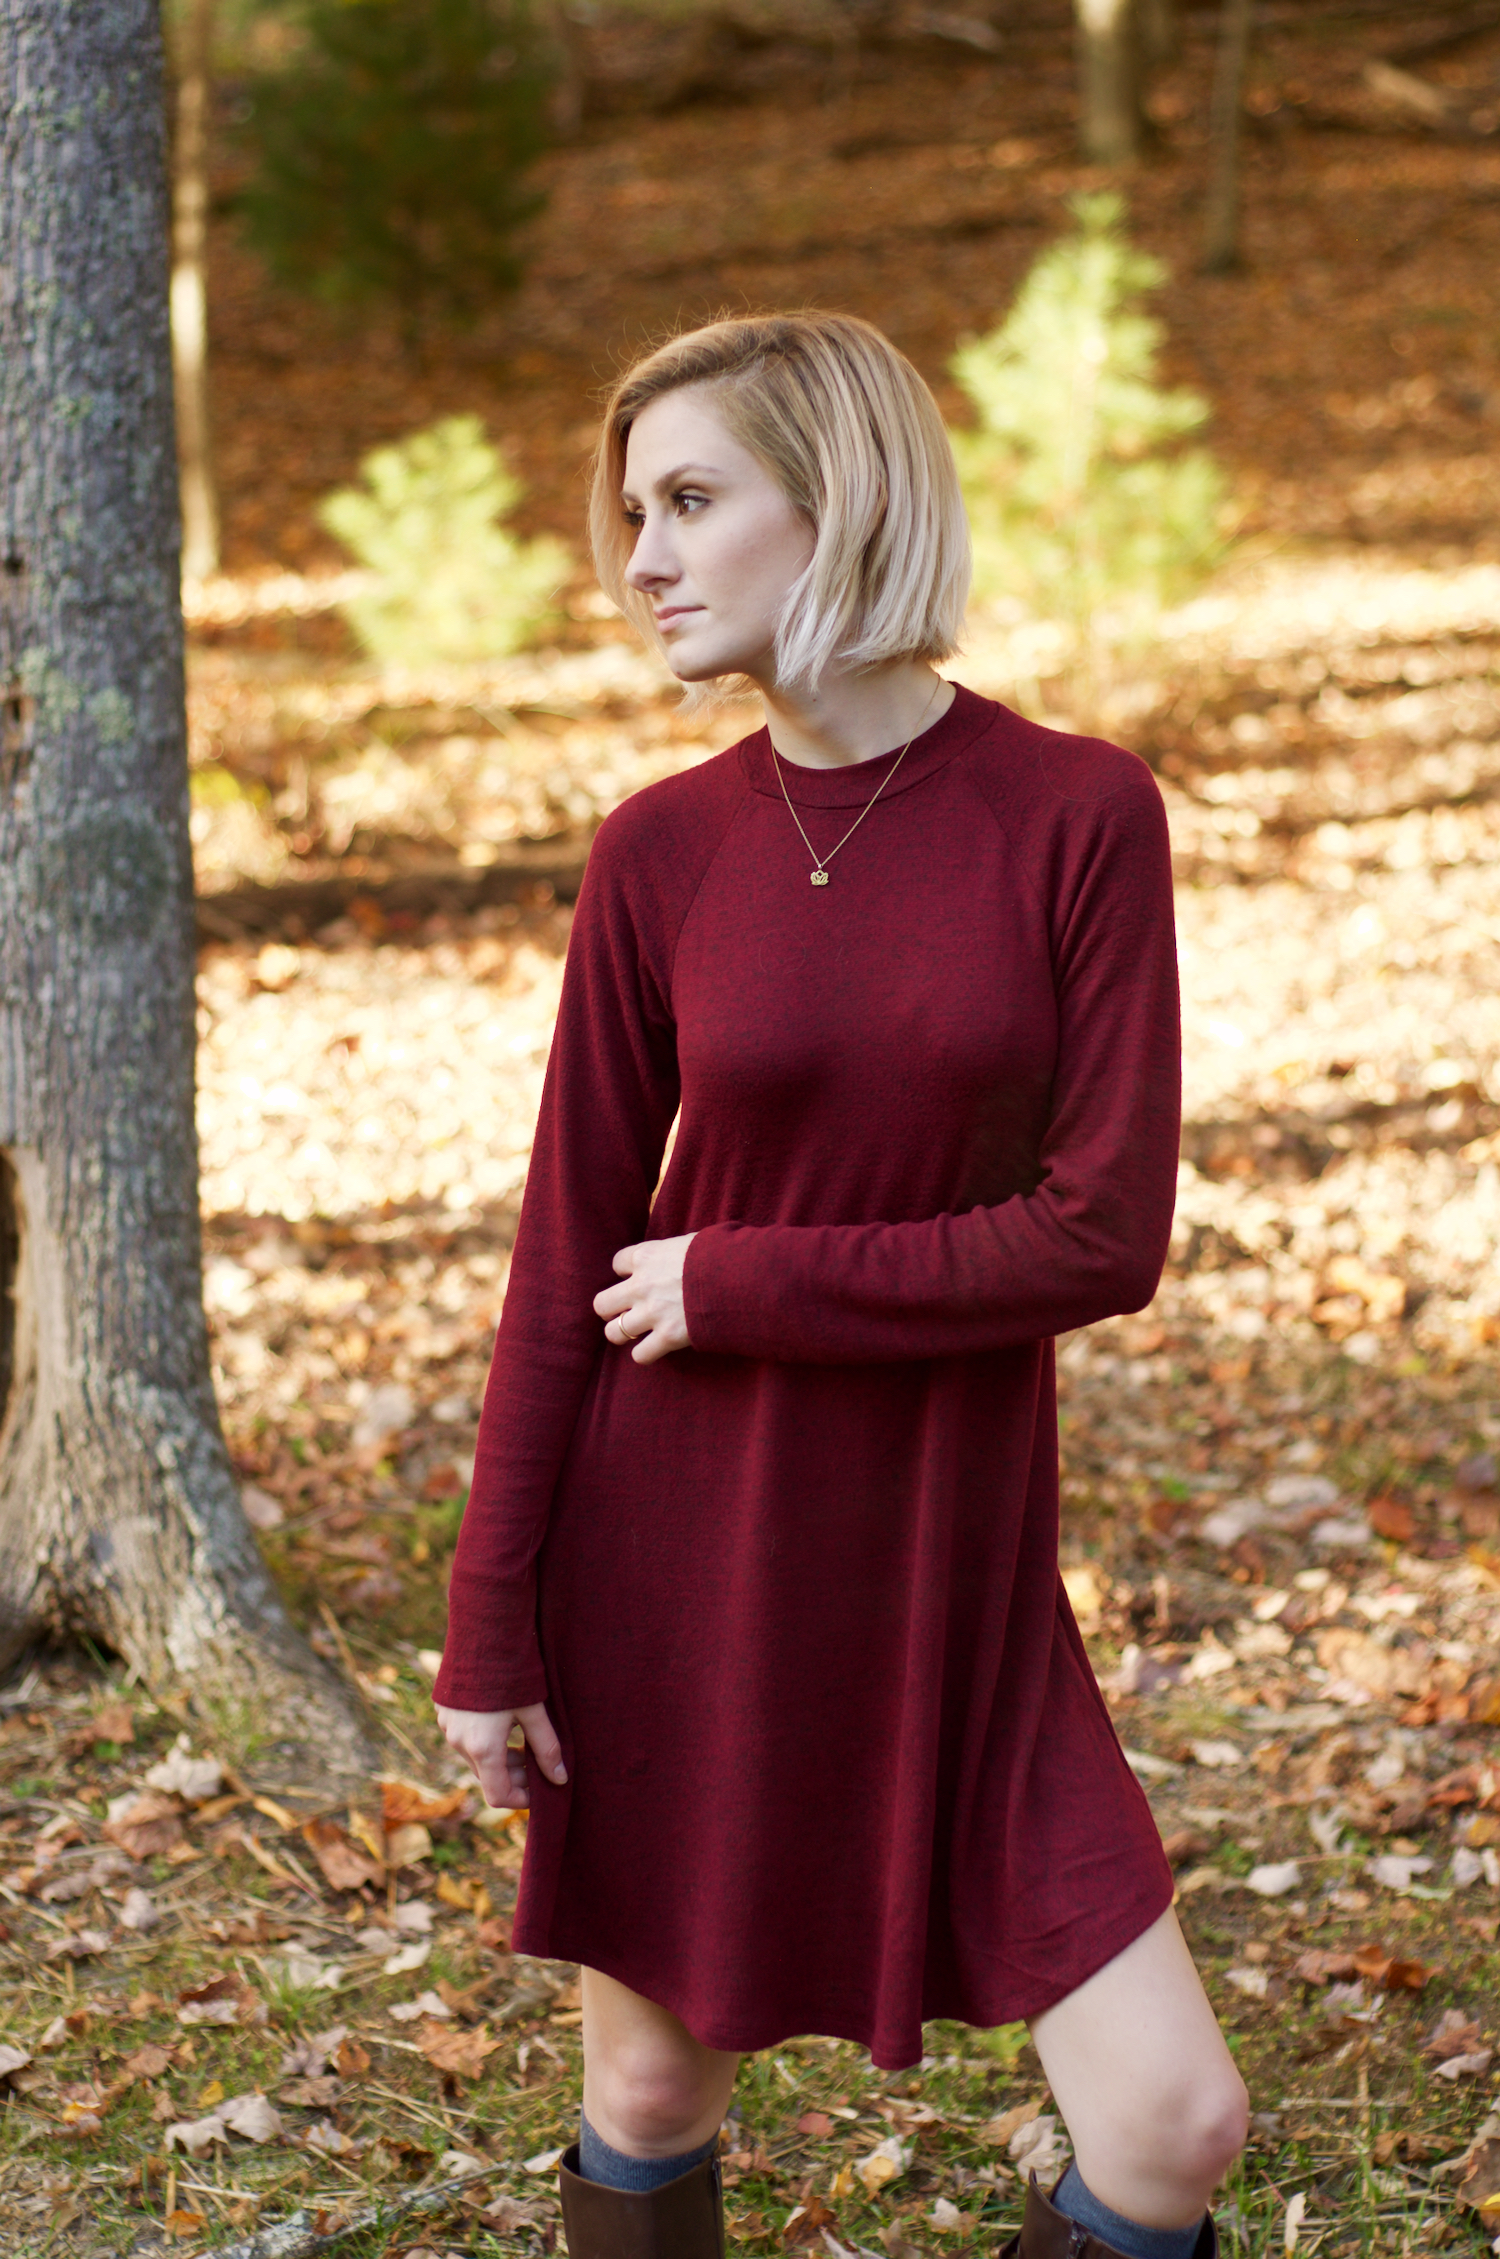 Maroon Dress Perfect For Fall! Cozy Fall Fashion Inspiration.